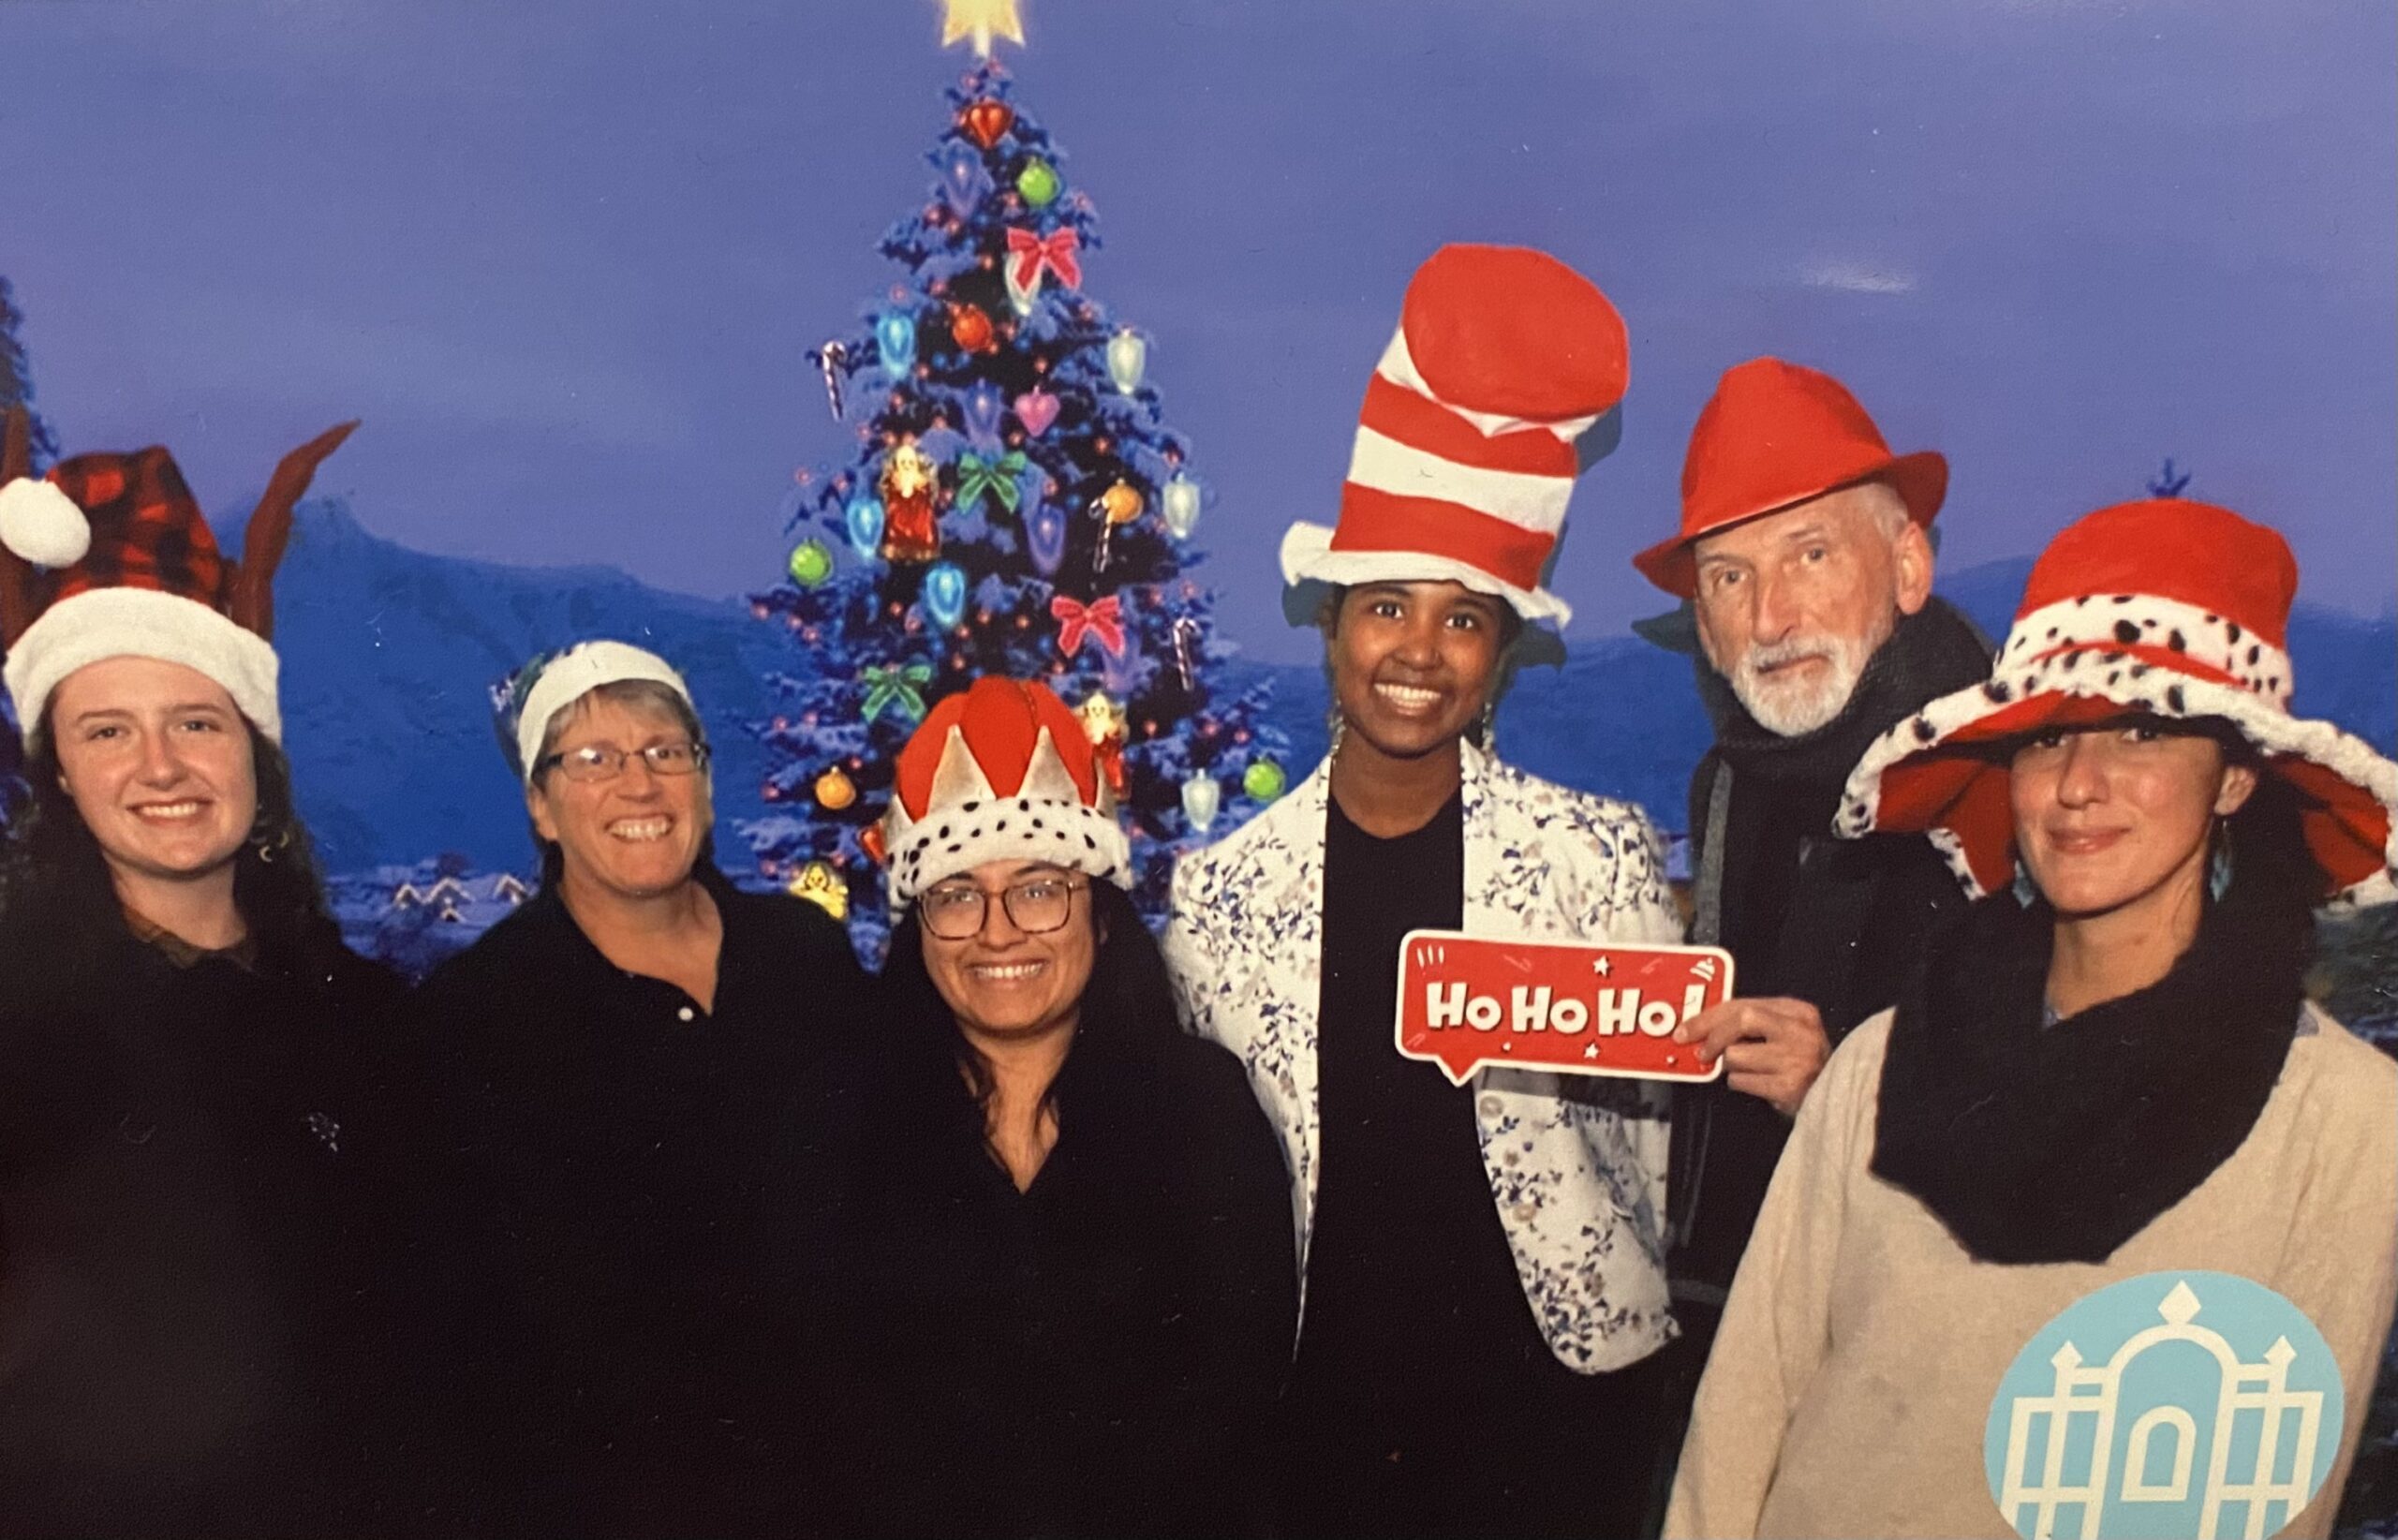 Jandon staff posing for a photo with funny hats at a holiday party